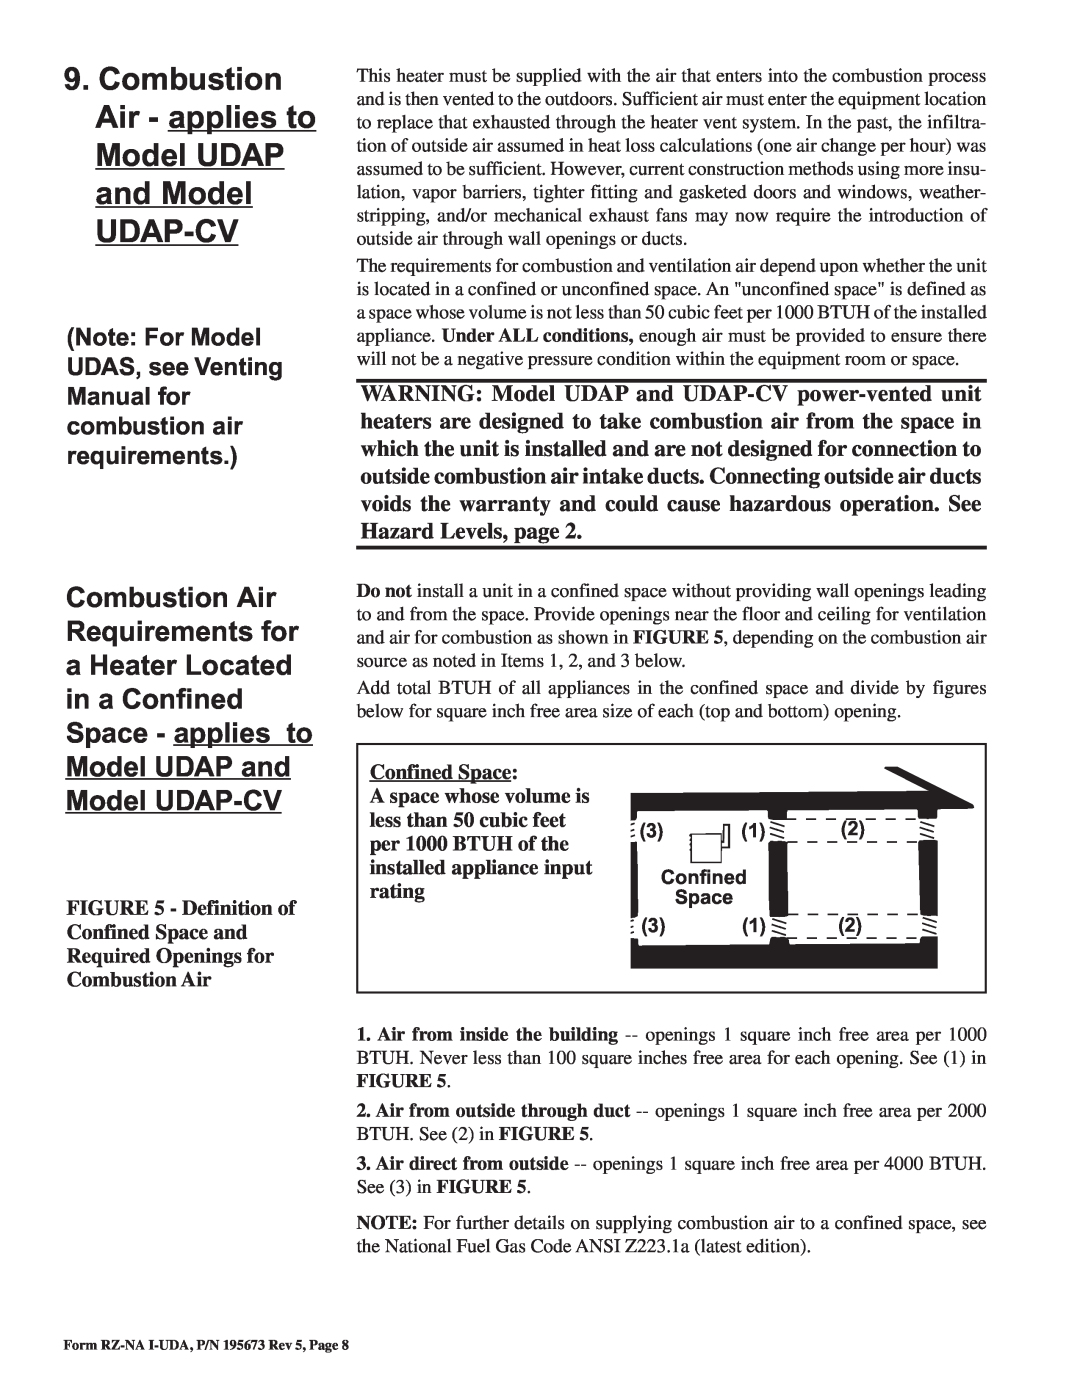 Thomas & Betts UDAS dimensions Udap-Cv, Model UDAP and Model UDAP-CV, Confined Space 